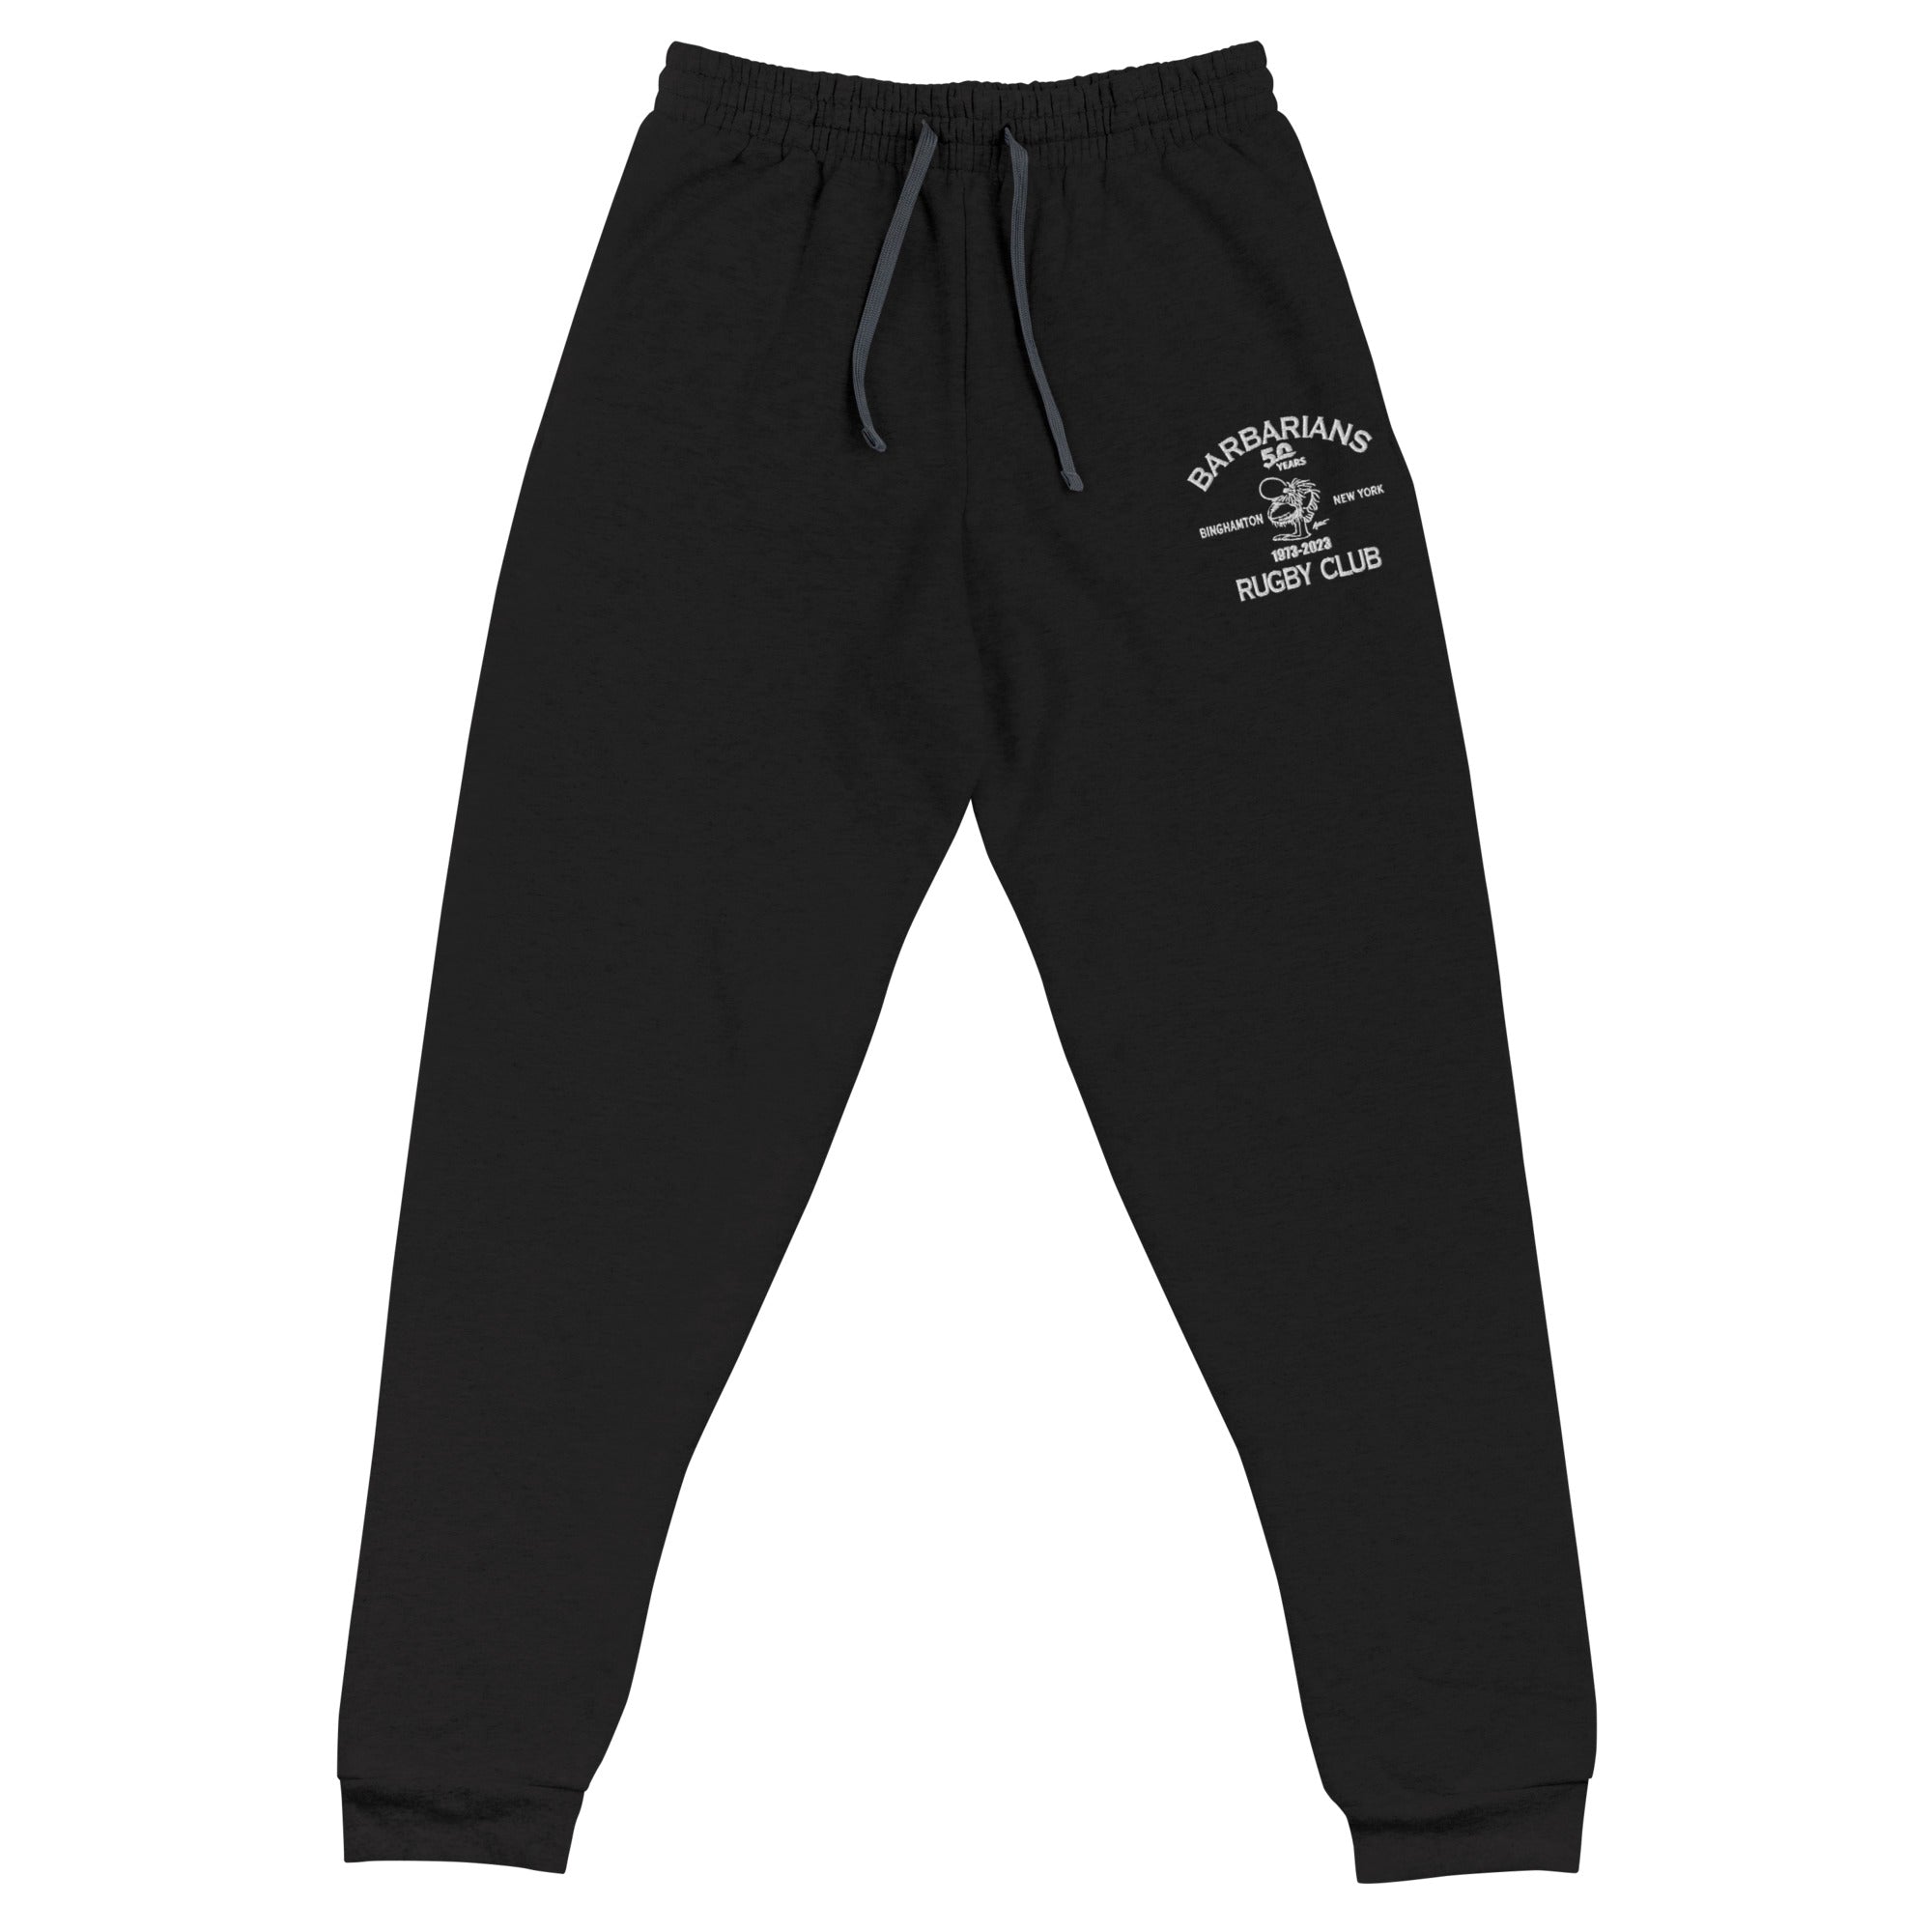 Rugby Imports Binghamton Barbarians Rugby Jogger Sweatpants